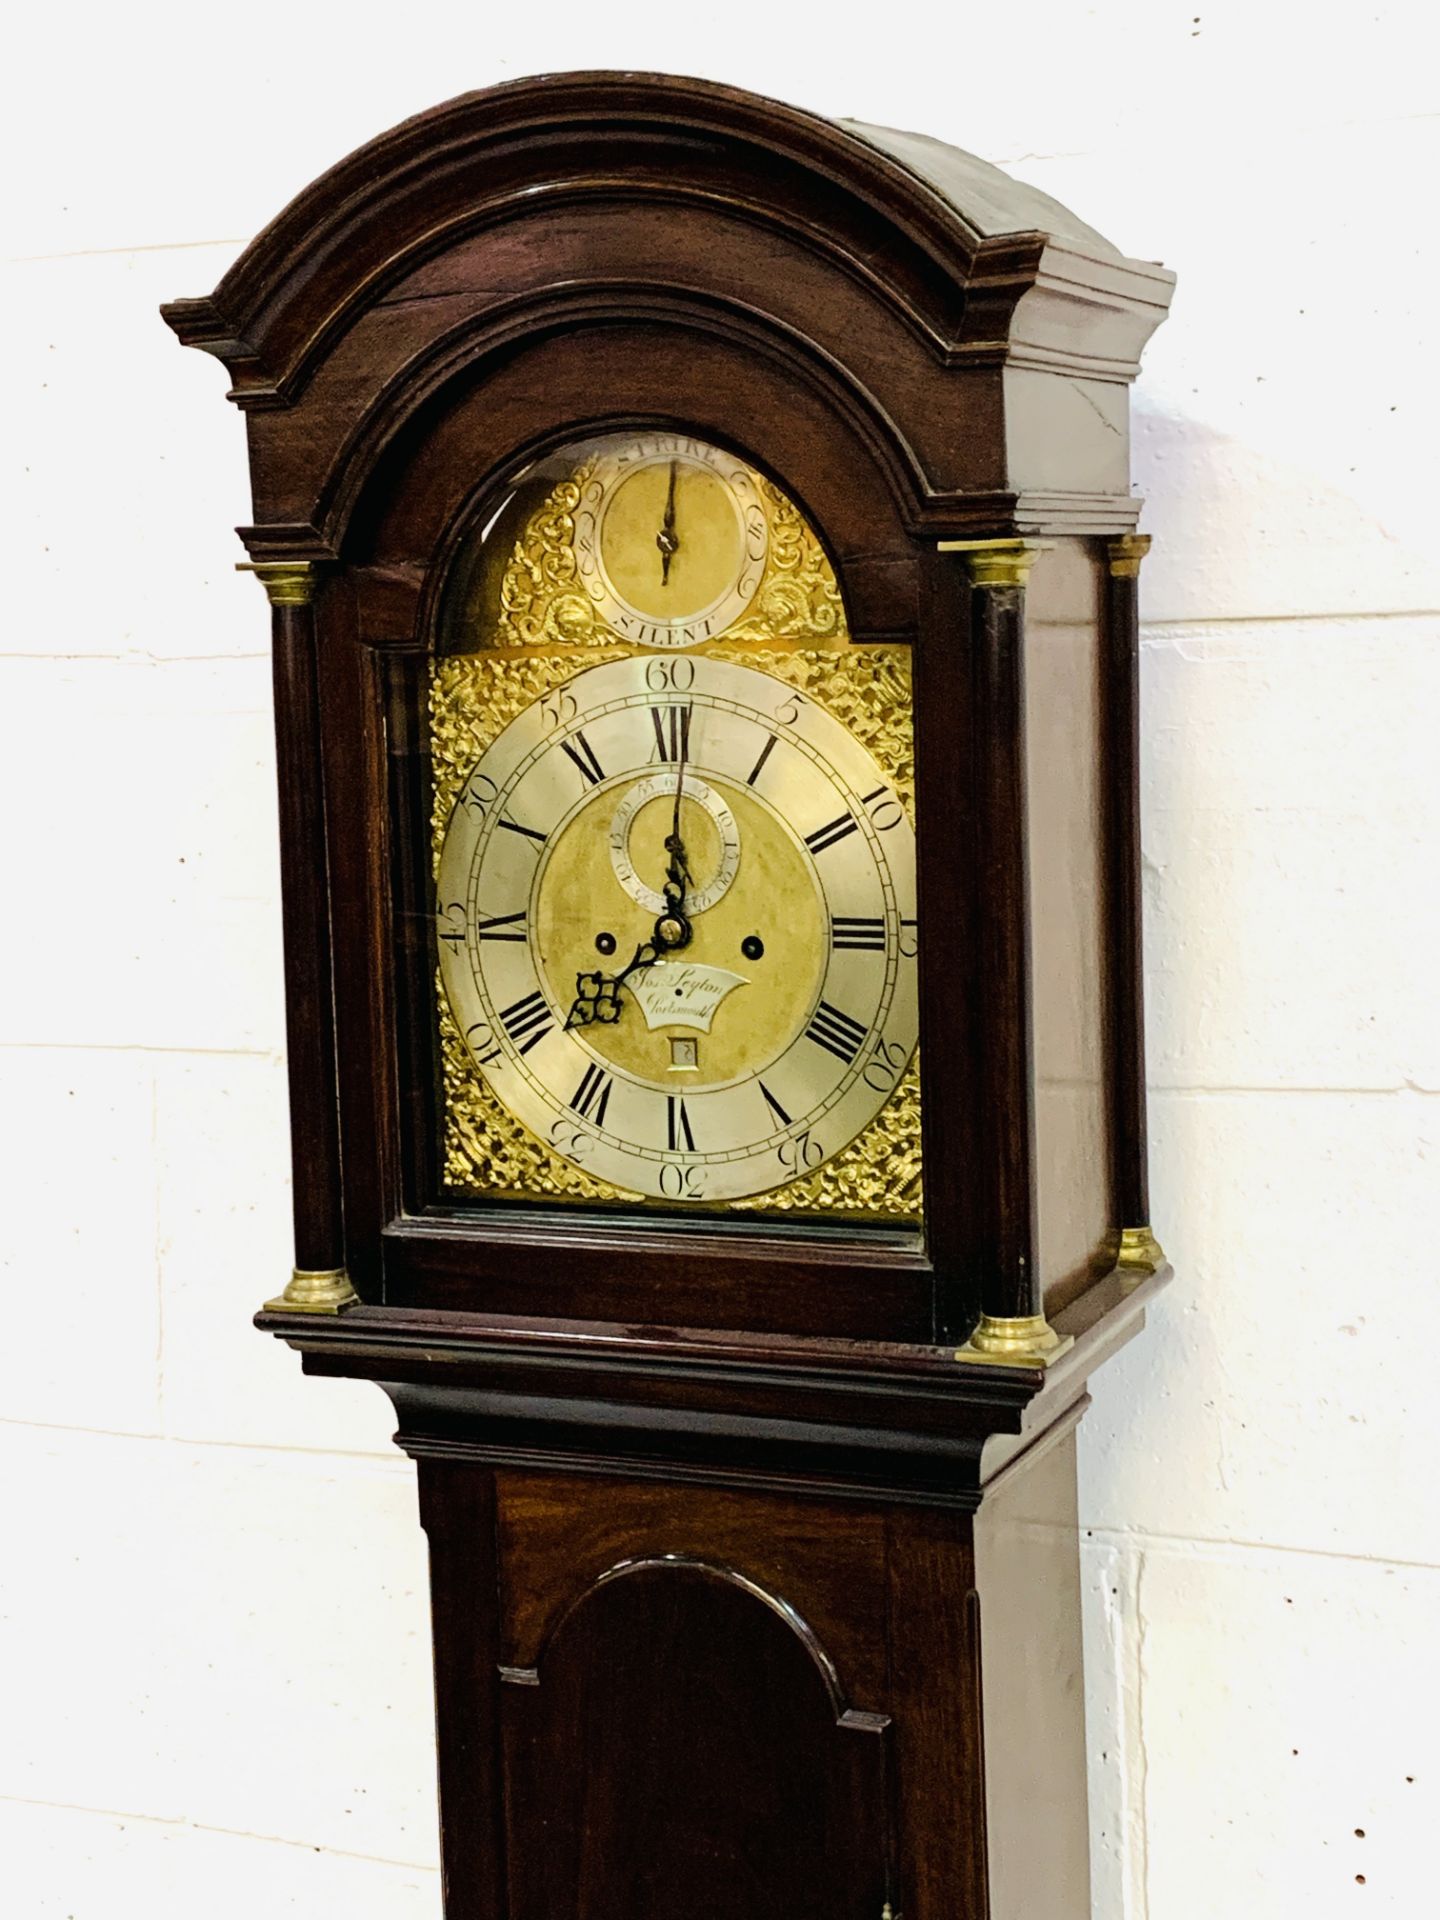 Mahogany long case clock with columned and arched hood by Jos. Leyton of Portsmouth - Image 8 of 9